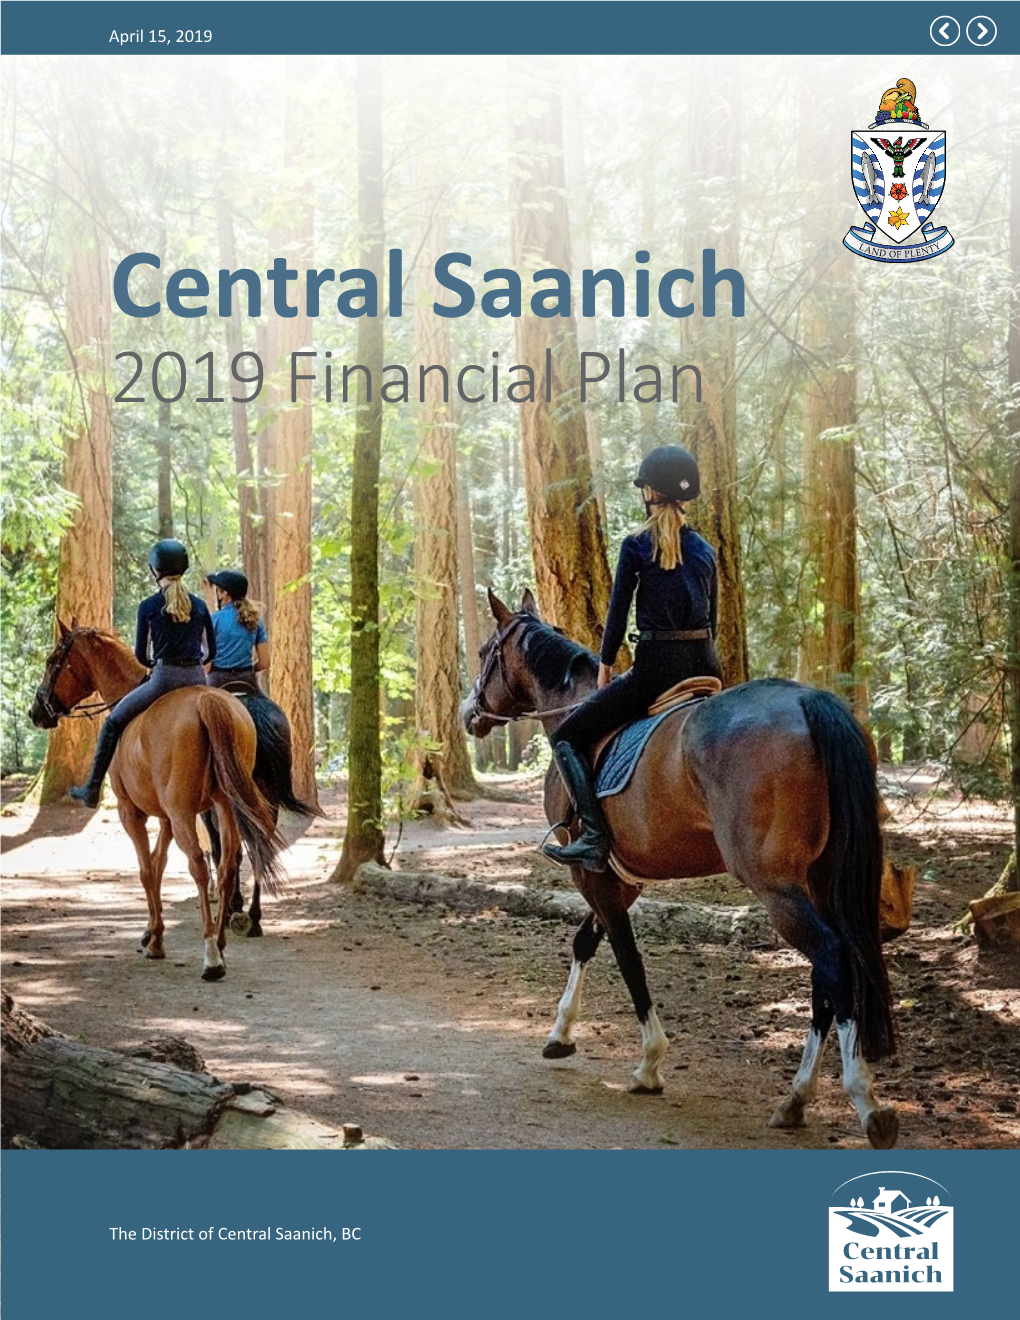 Financial Plan for 2019 Balances $28 Million in Revenues and with $28 Million in Expenditures from All Funds